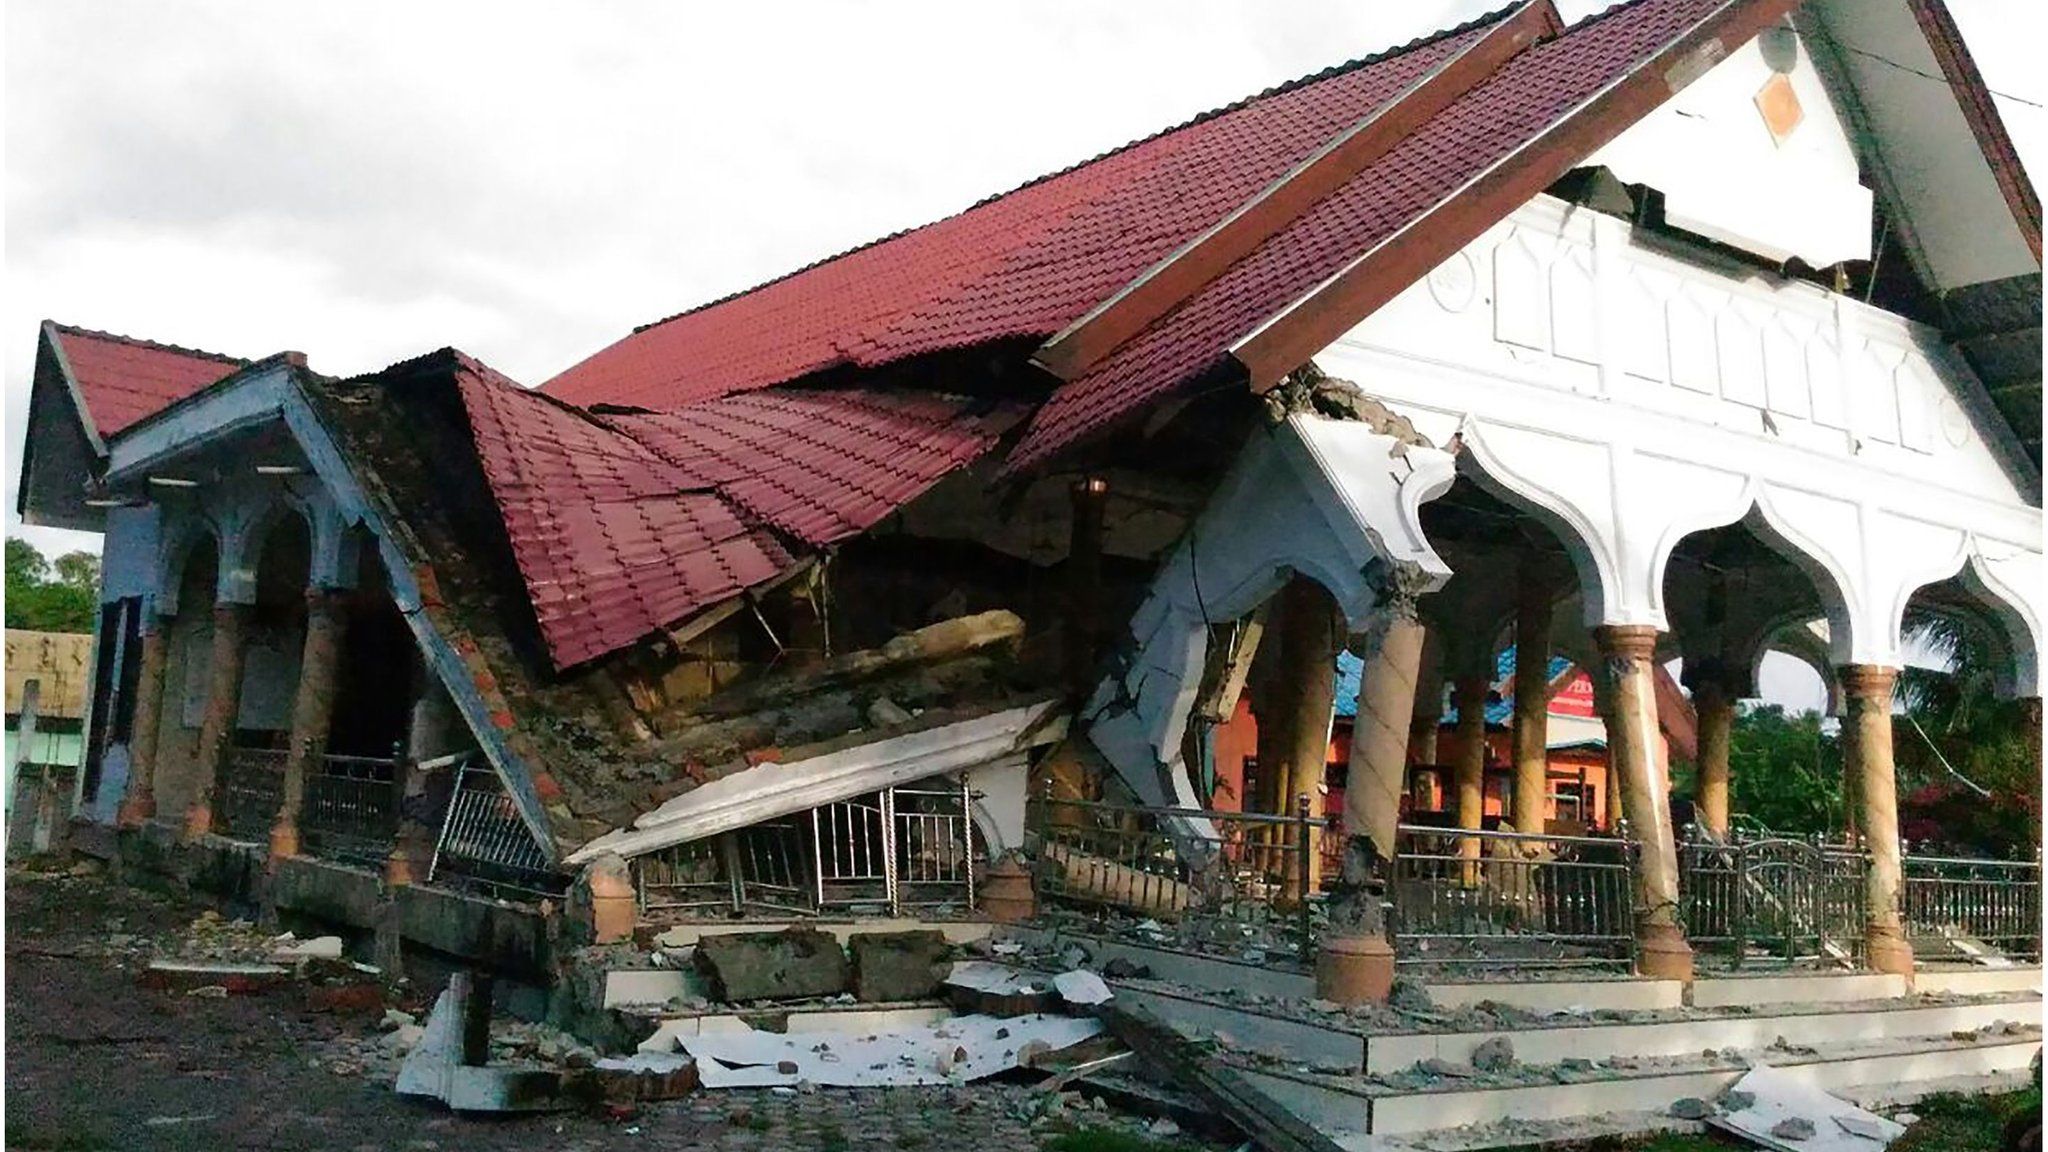 A badly damaged building is seen after the earthquake. Pidie, Indonesia on 7 December 2016.